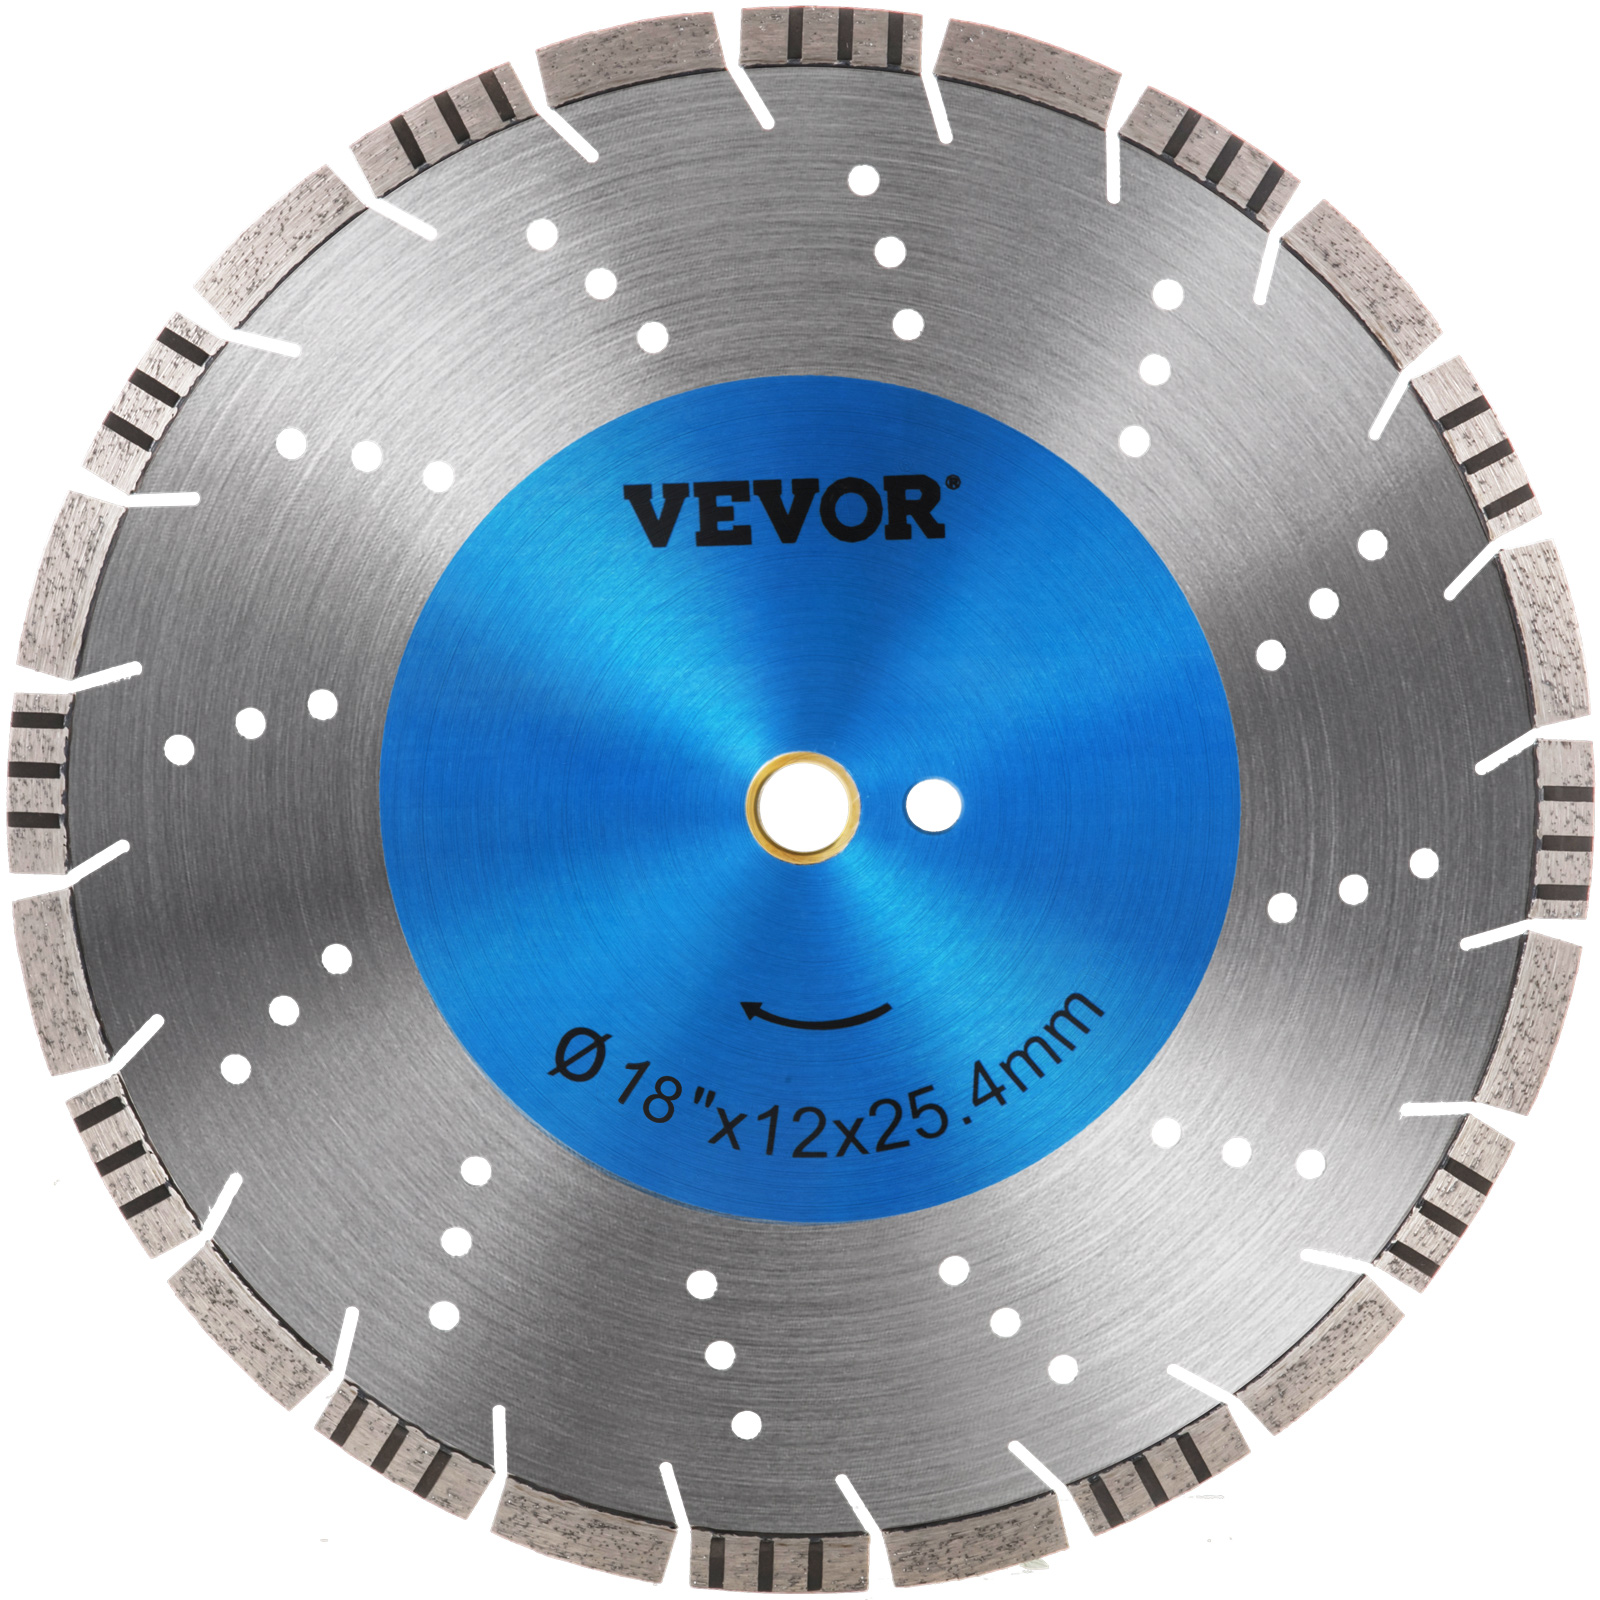 Vevor 18in Diamond Blade Concrete Saw Blade 0.47in Tall Segments For Concrete от Vevor Many GEOs